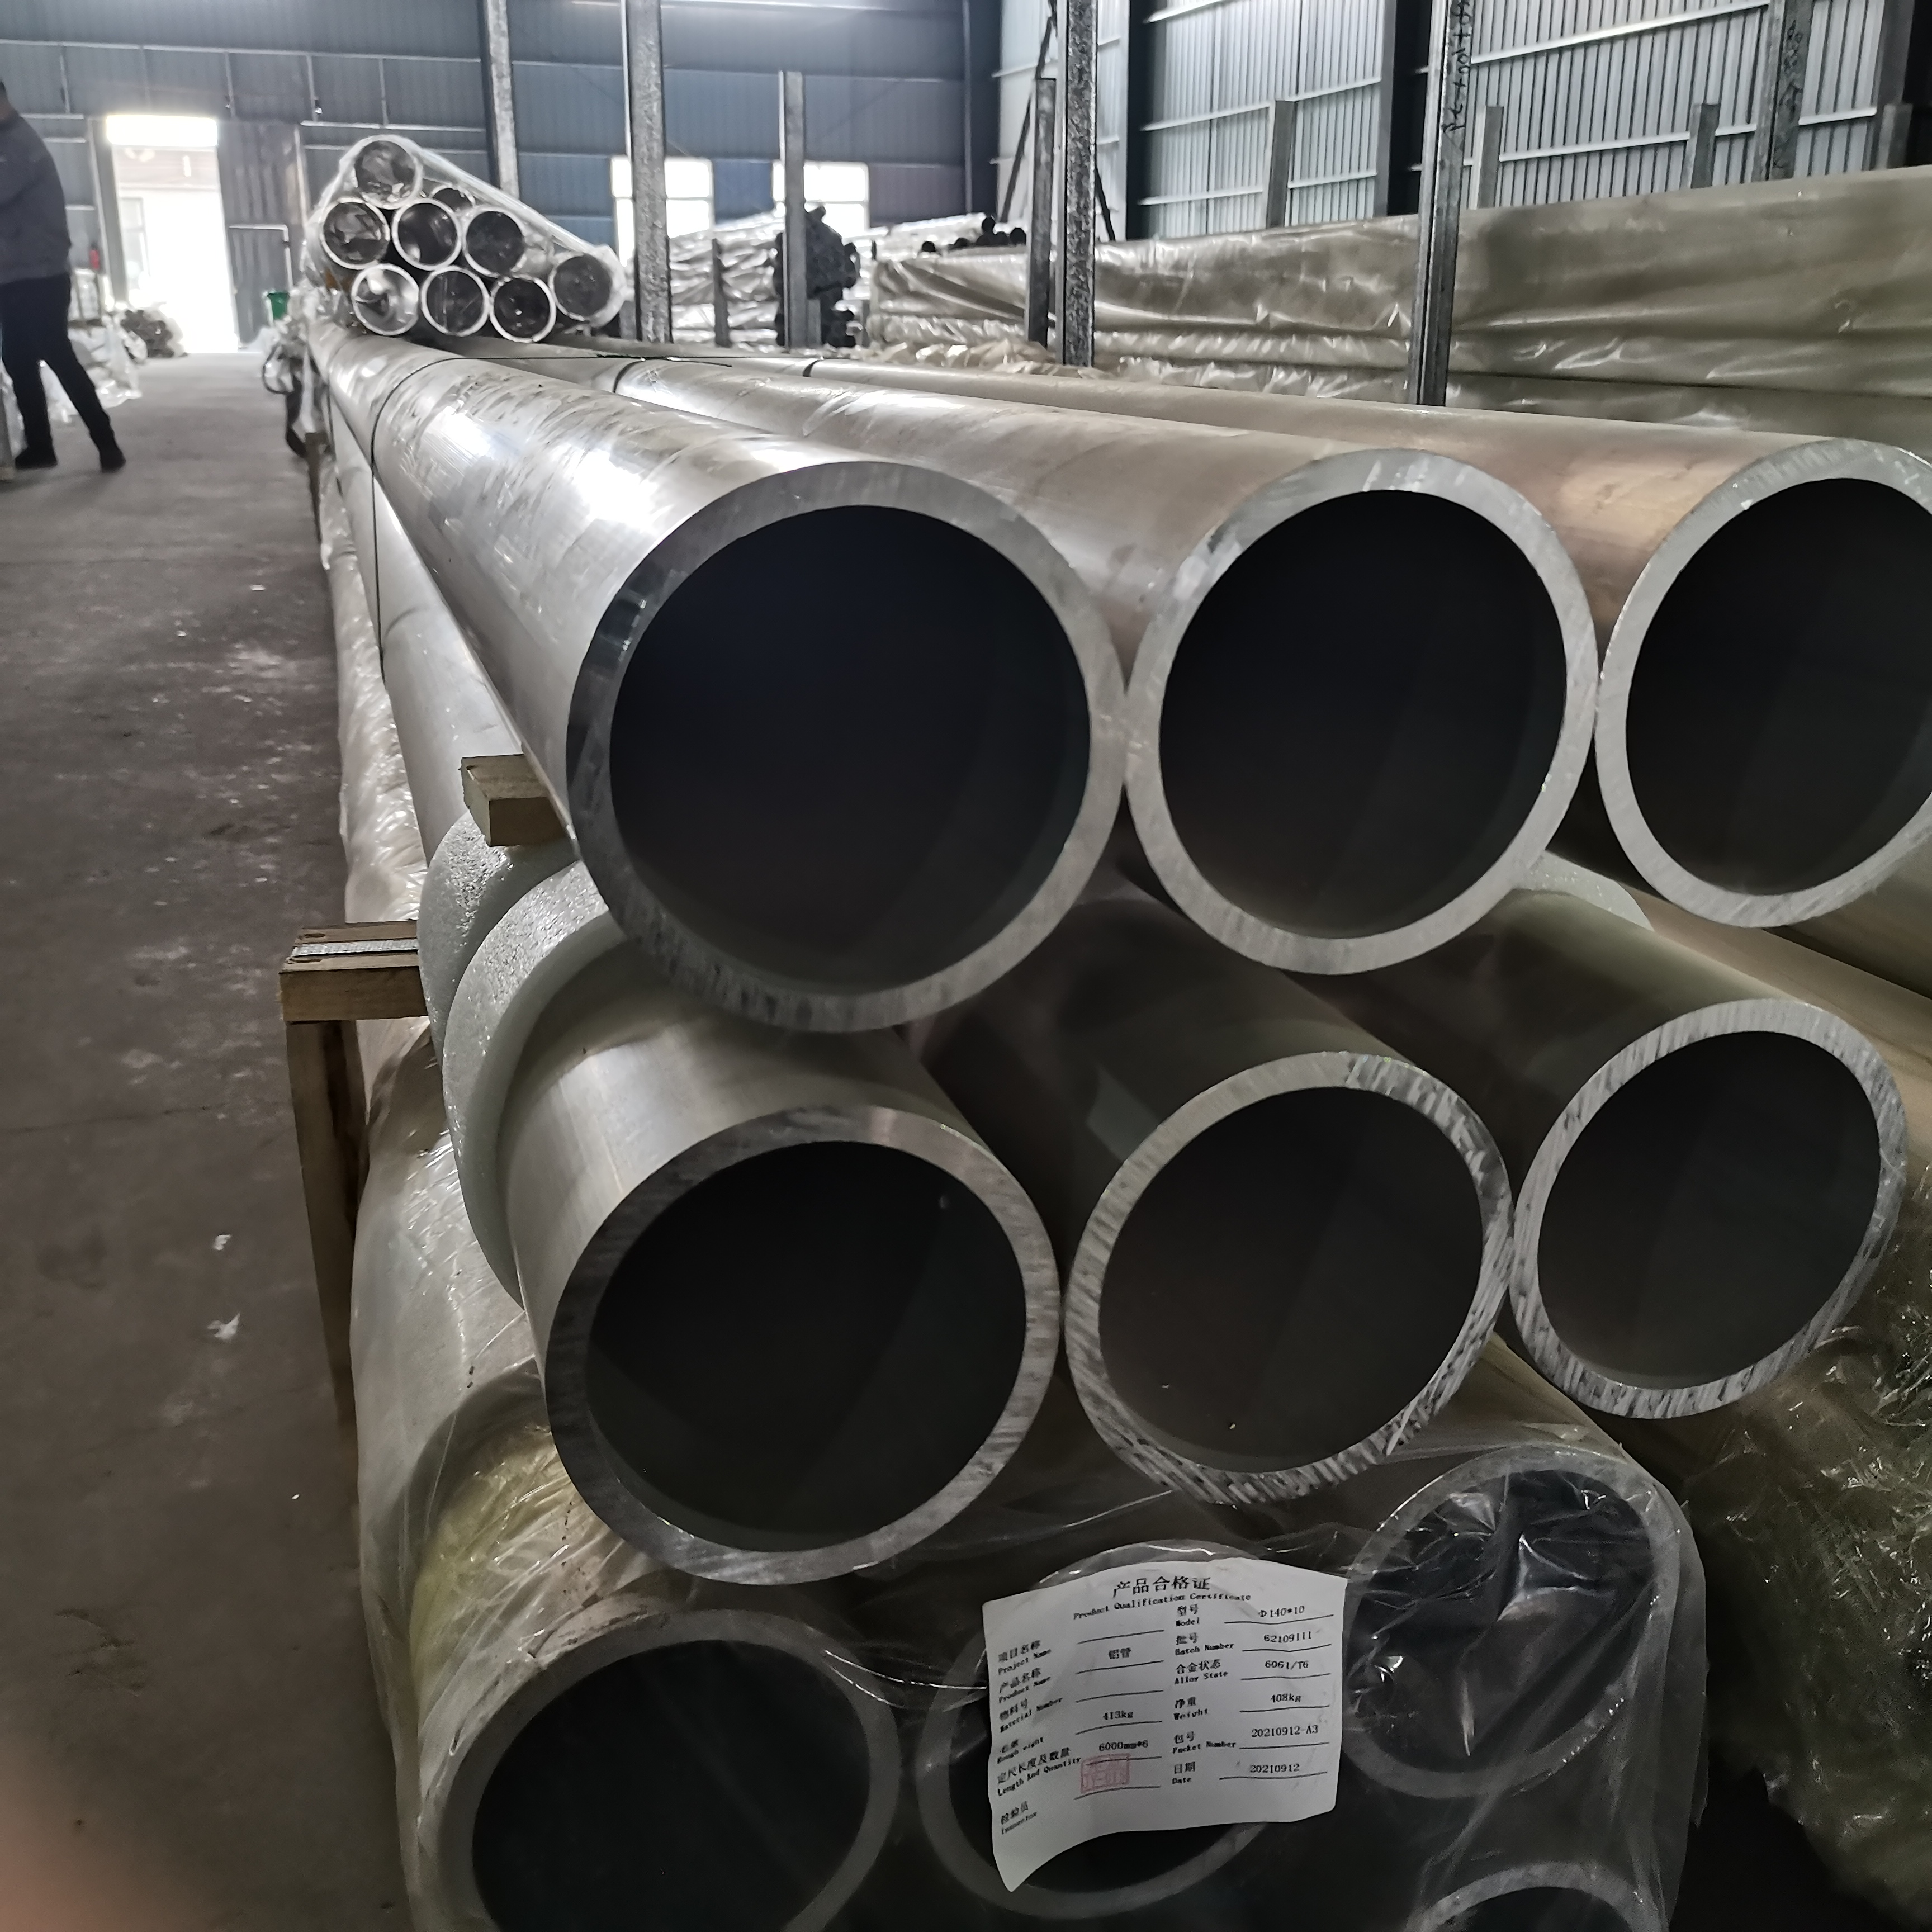 China Supplier Customized Aluminum Tube 6061 6063 7075 T6 Aluminum Pipe with Competitive Price